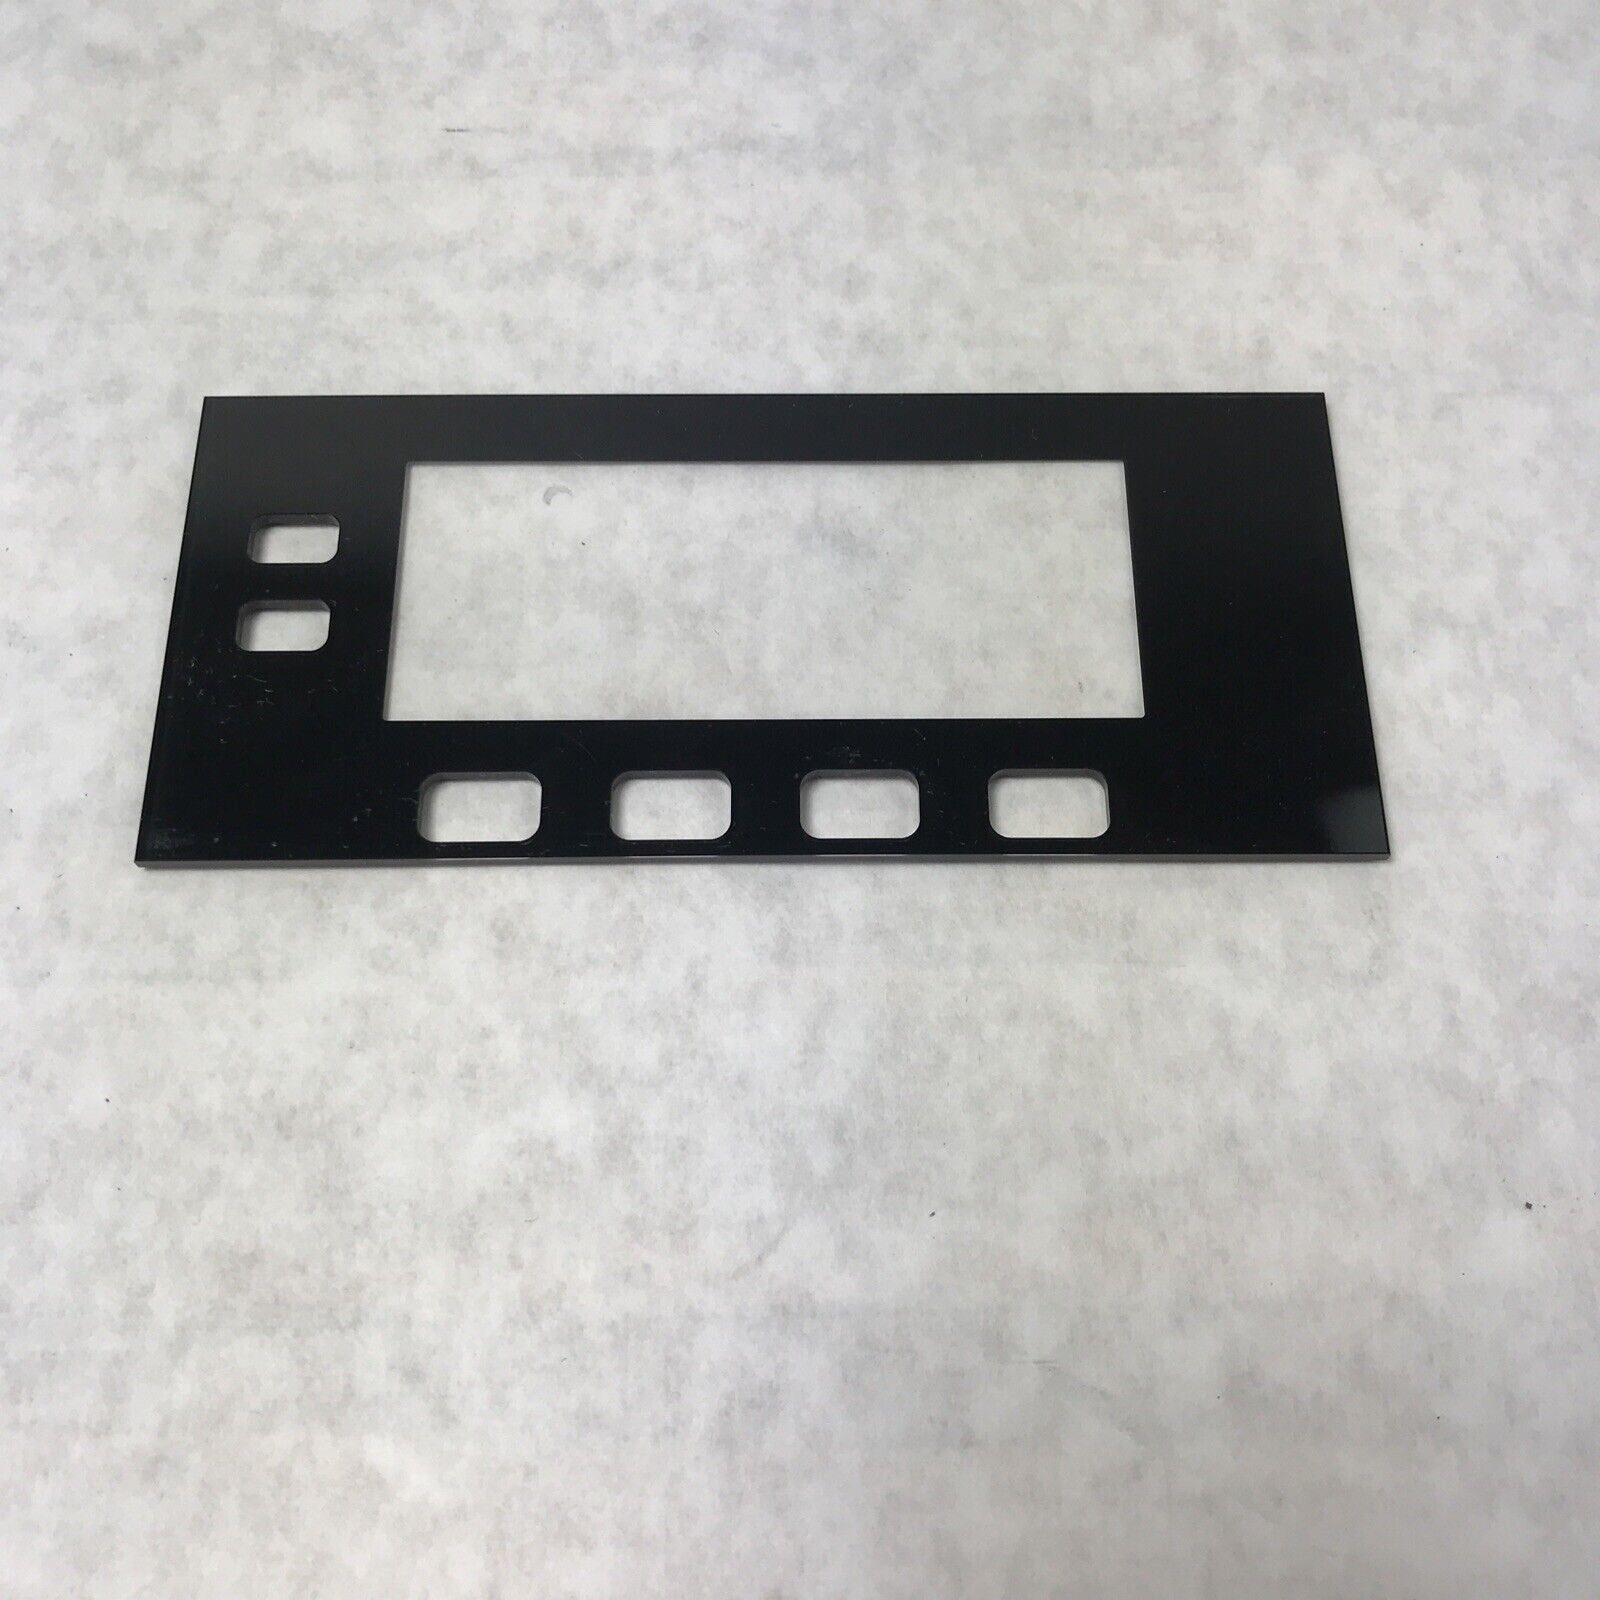 Cisco 7821 Screen and Key Cover Magnetic Faceplate Protector CP-7821